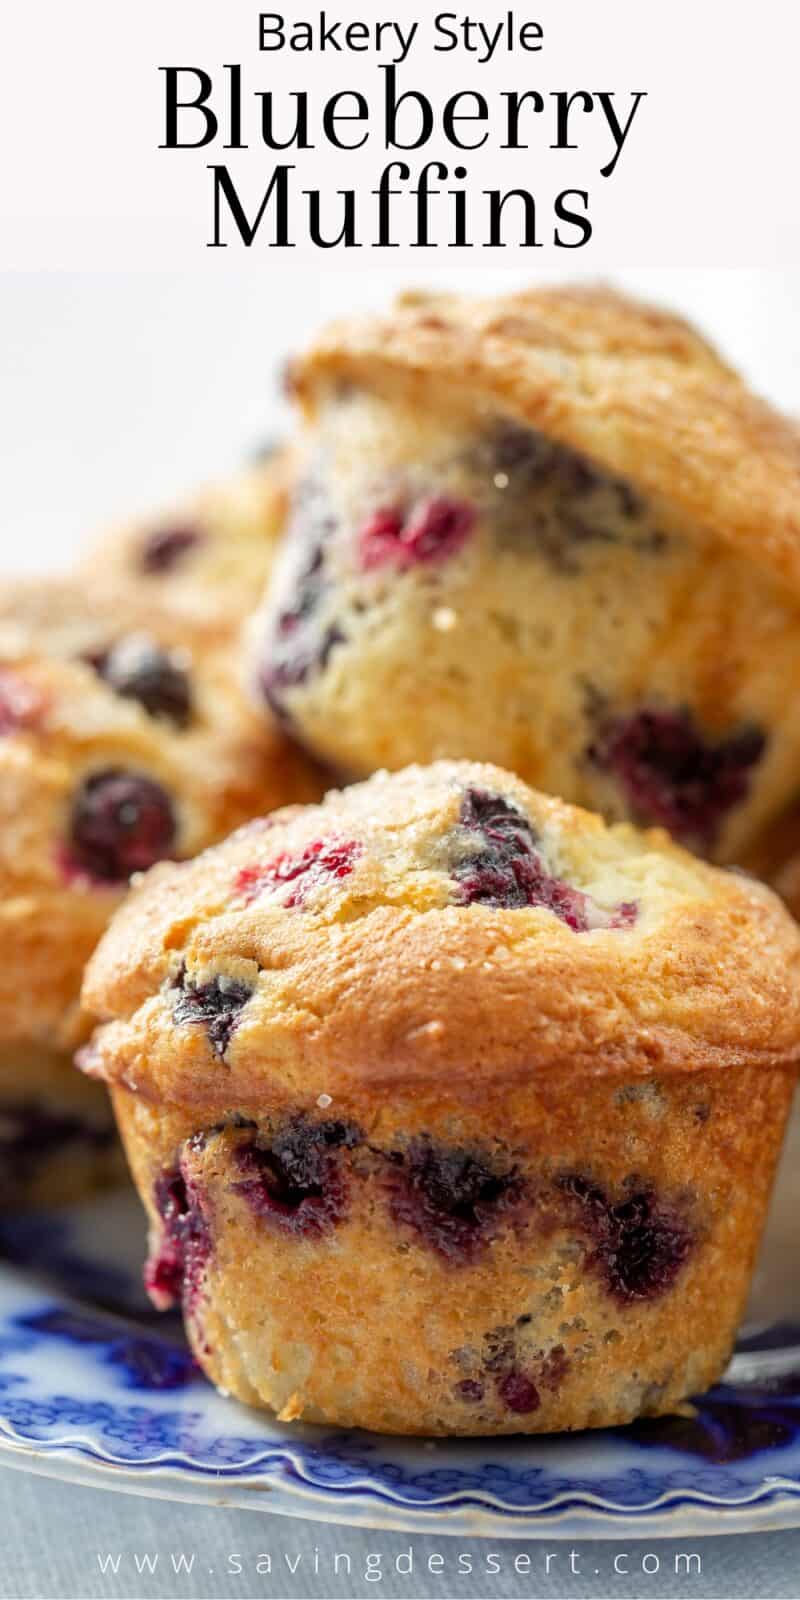 Closeup of a plate filled with blueberry muffins